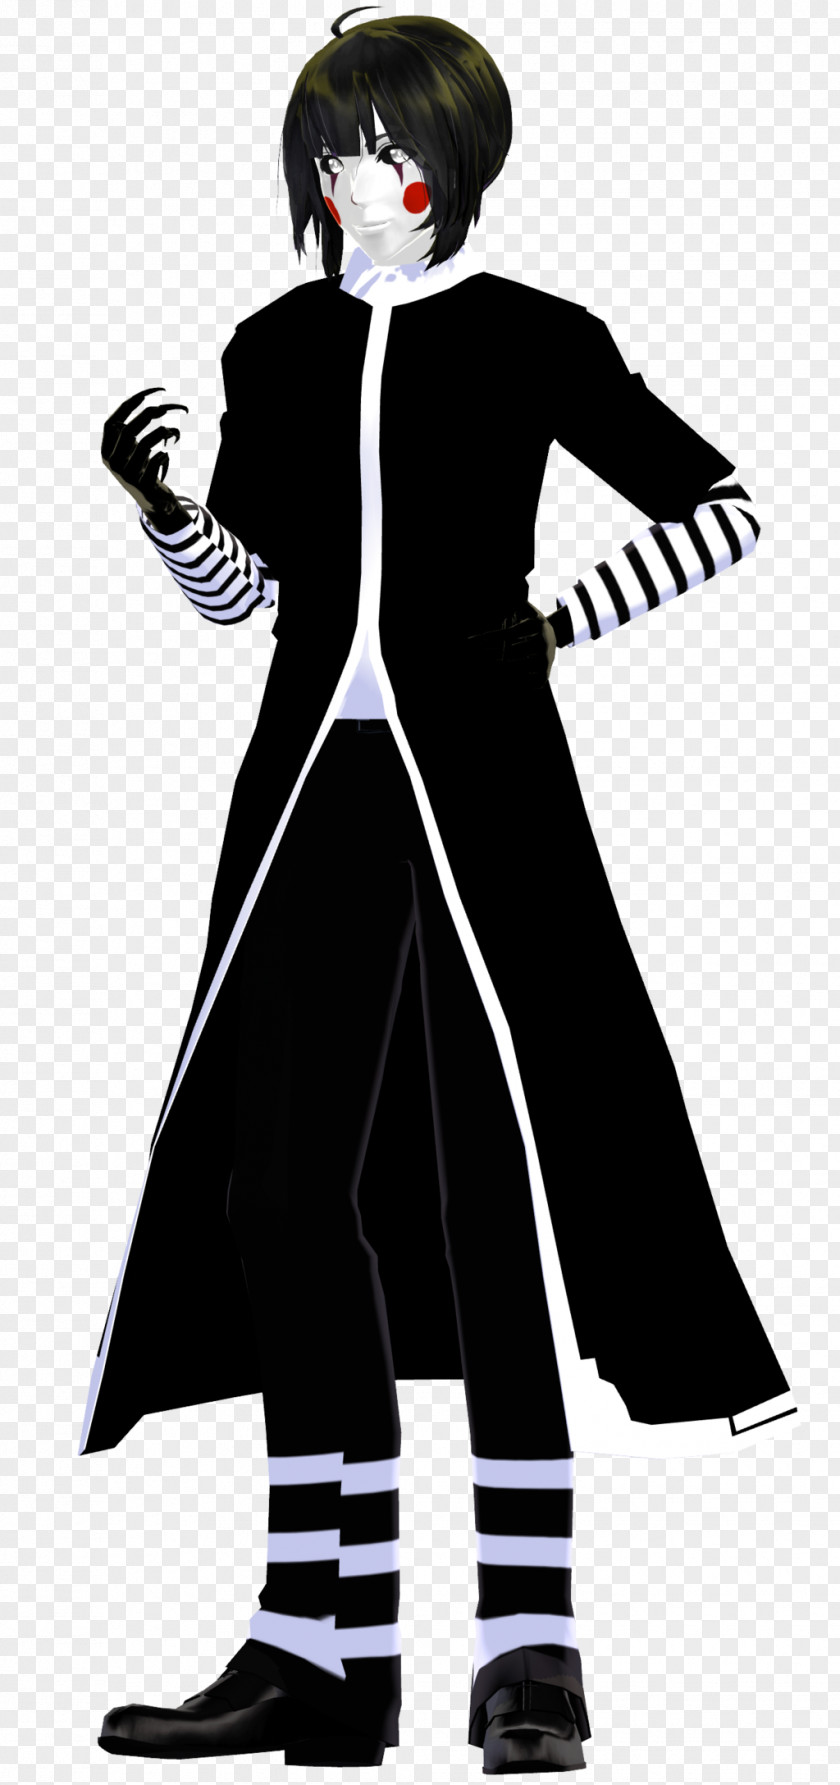 Puppet Master Fnaf Five Nights At Freddy's: Sister Location Freddy's 2 Marionette PNG